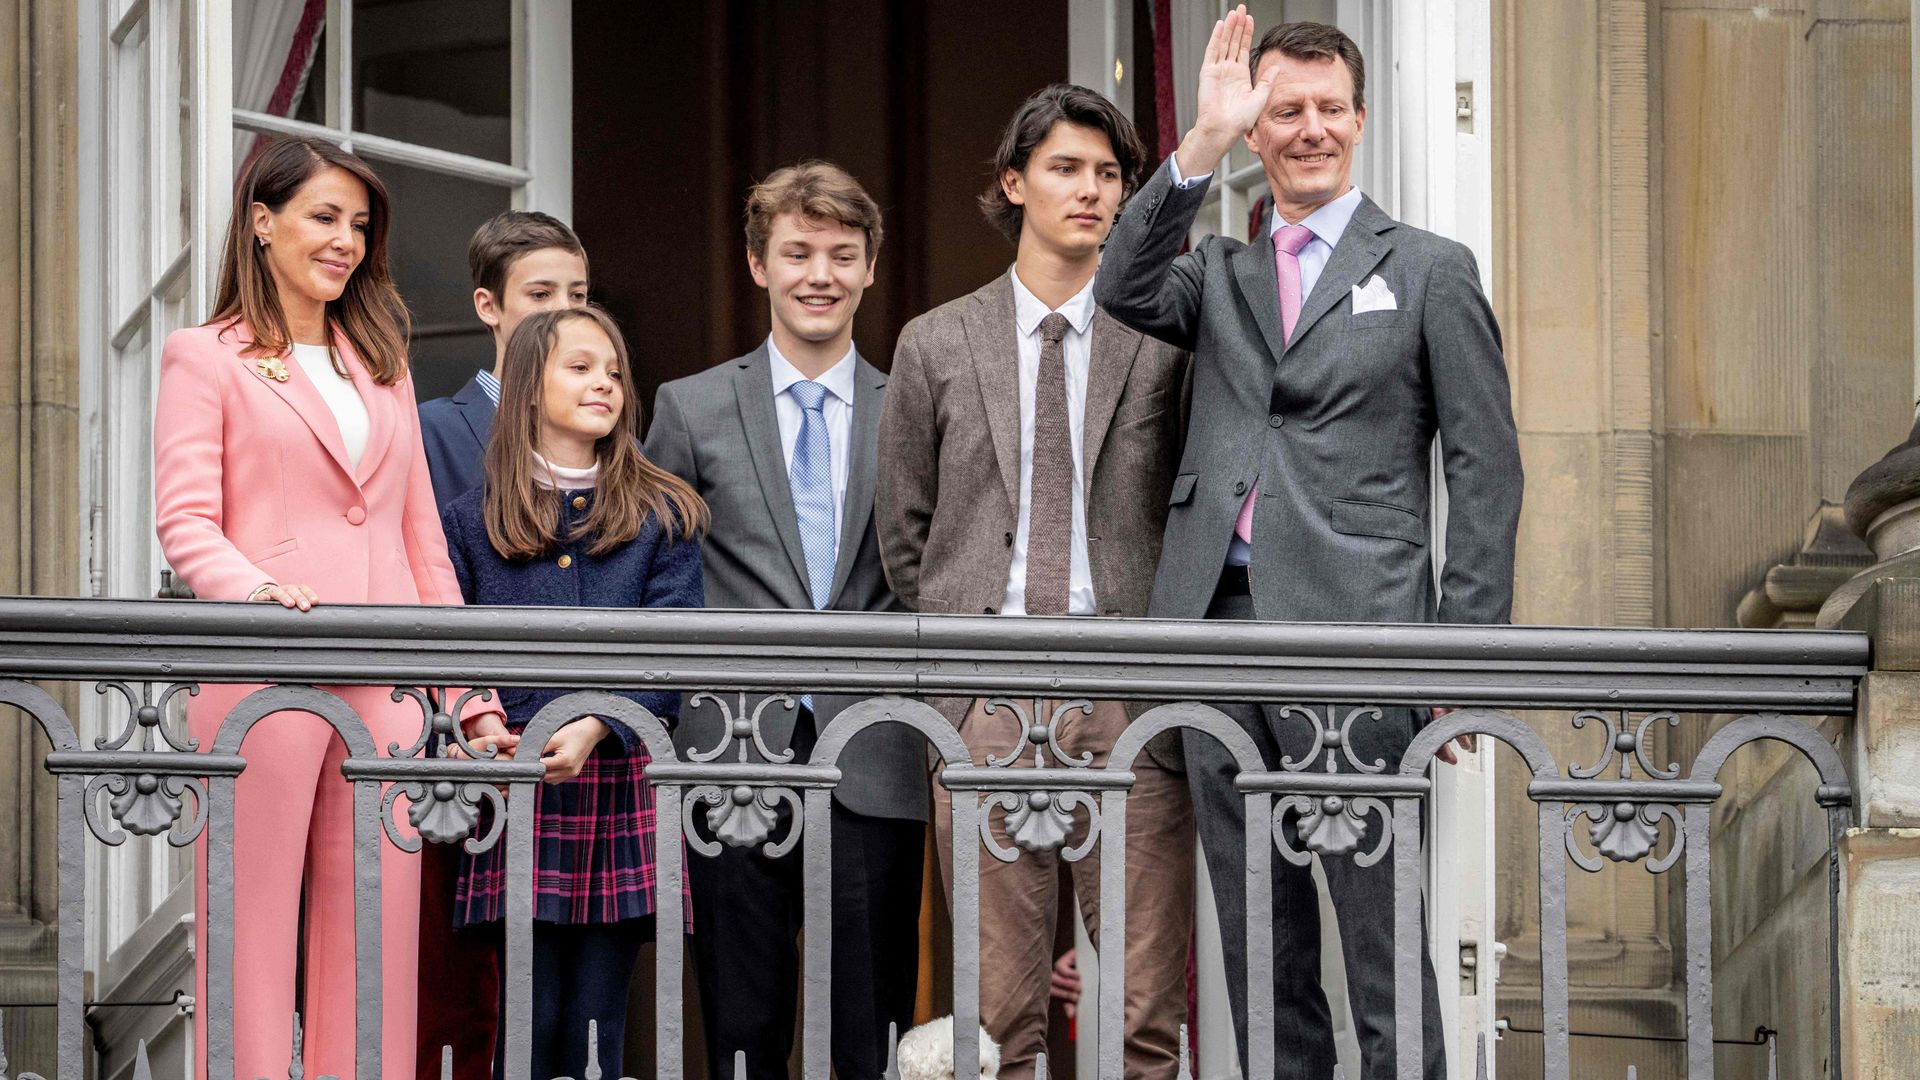 Prince Joachim's sons make surprising appearance after family reunion with Queen Margrethe